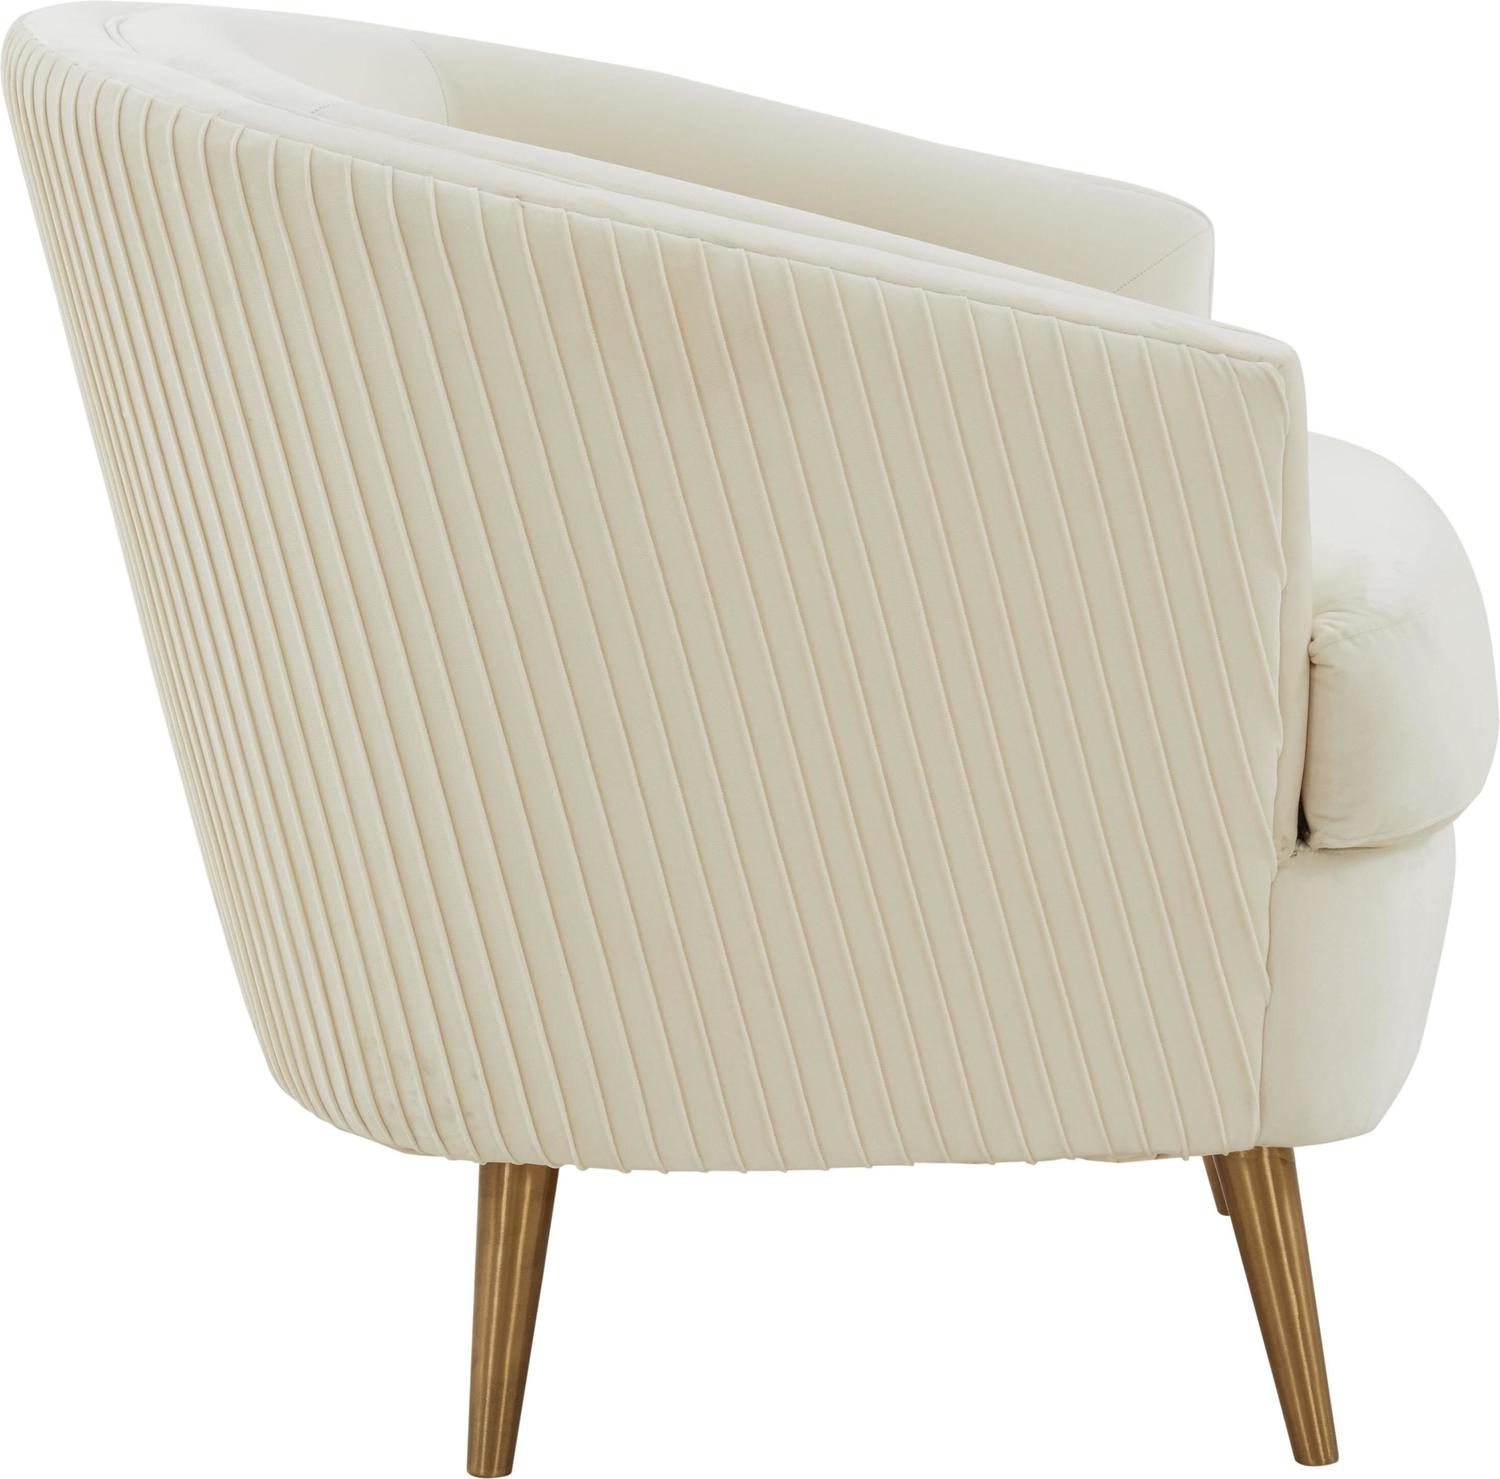 long chaise lounge chair Contemporary Design Furniture Accent Chairs Cream